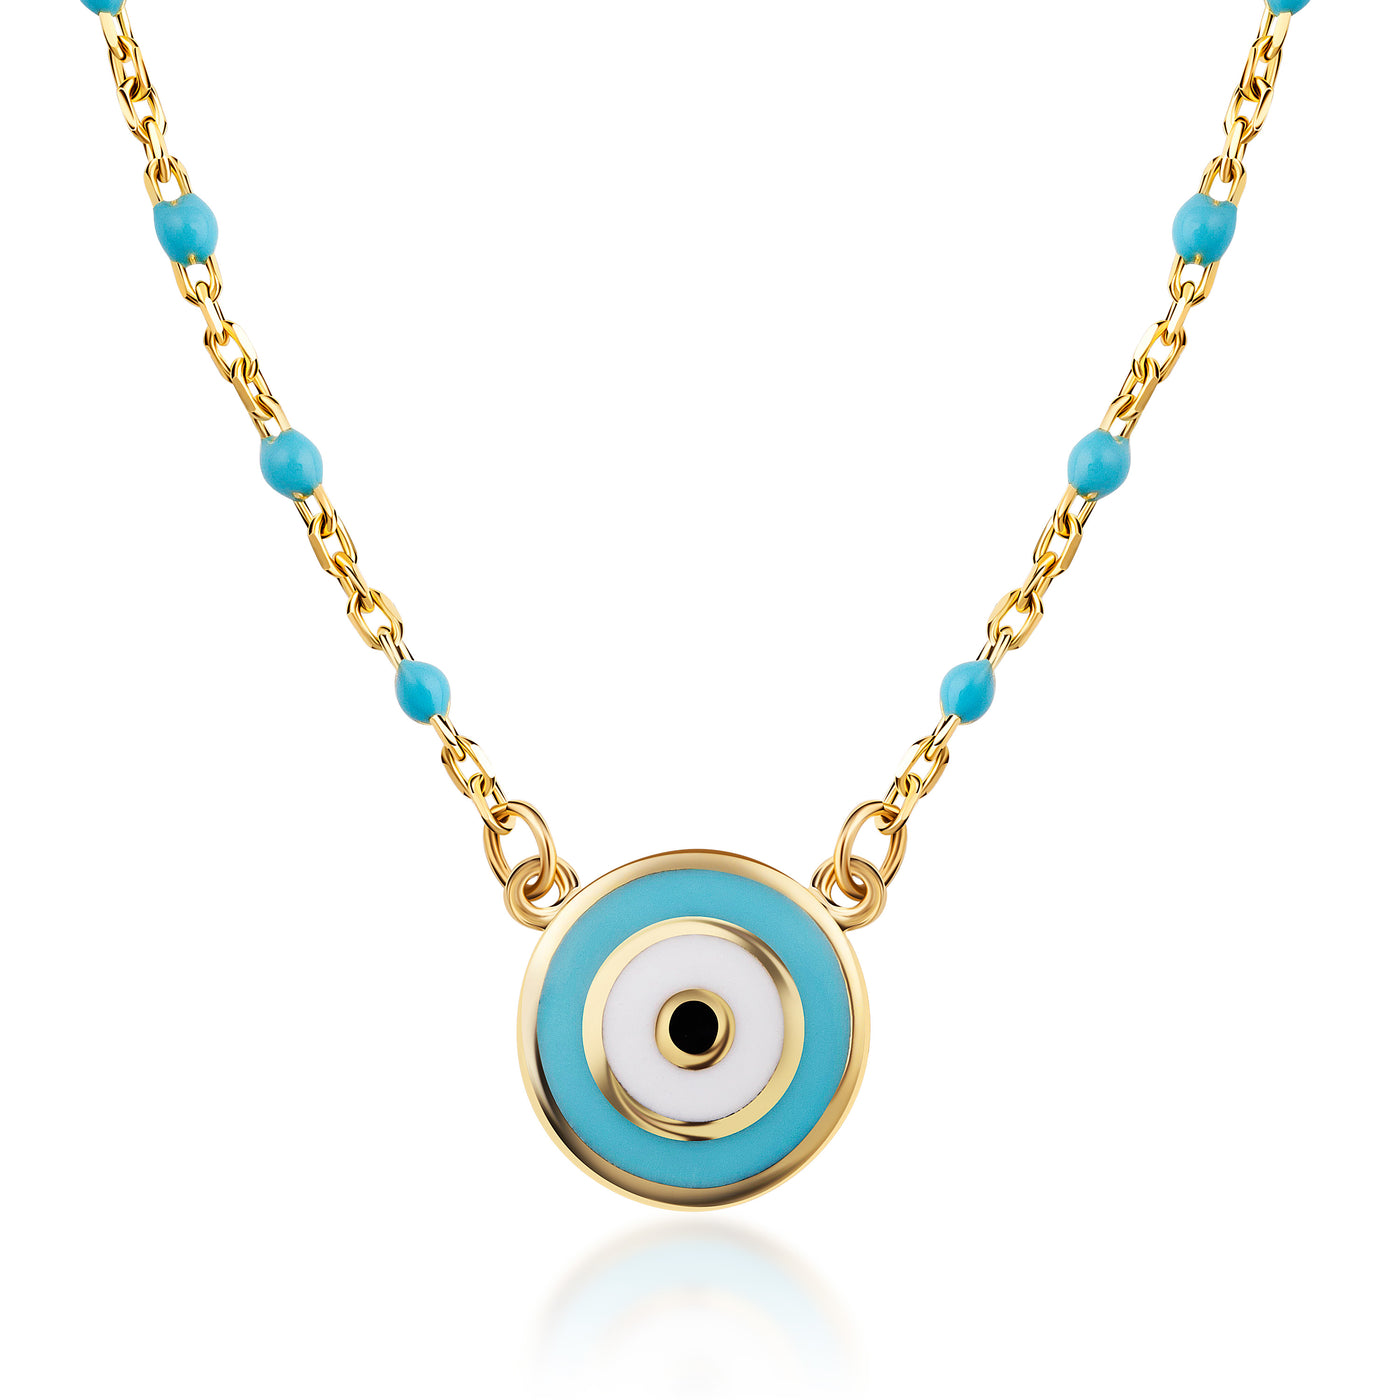 14K Solid Gold And Turquoise Chain Alternating Evil Eye Necklace